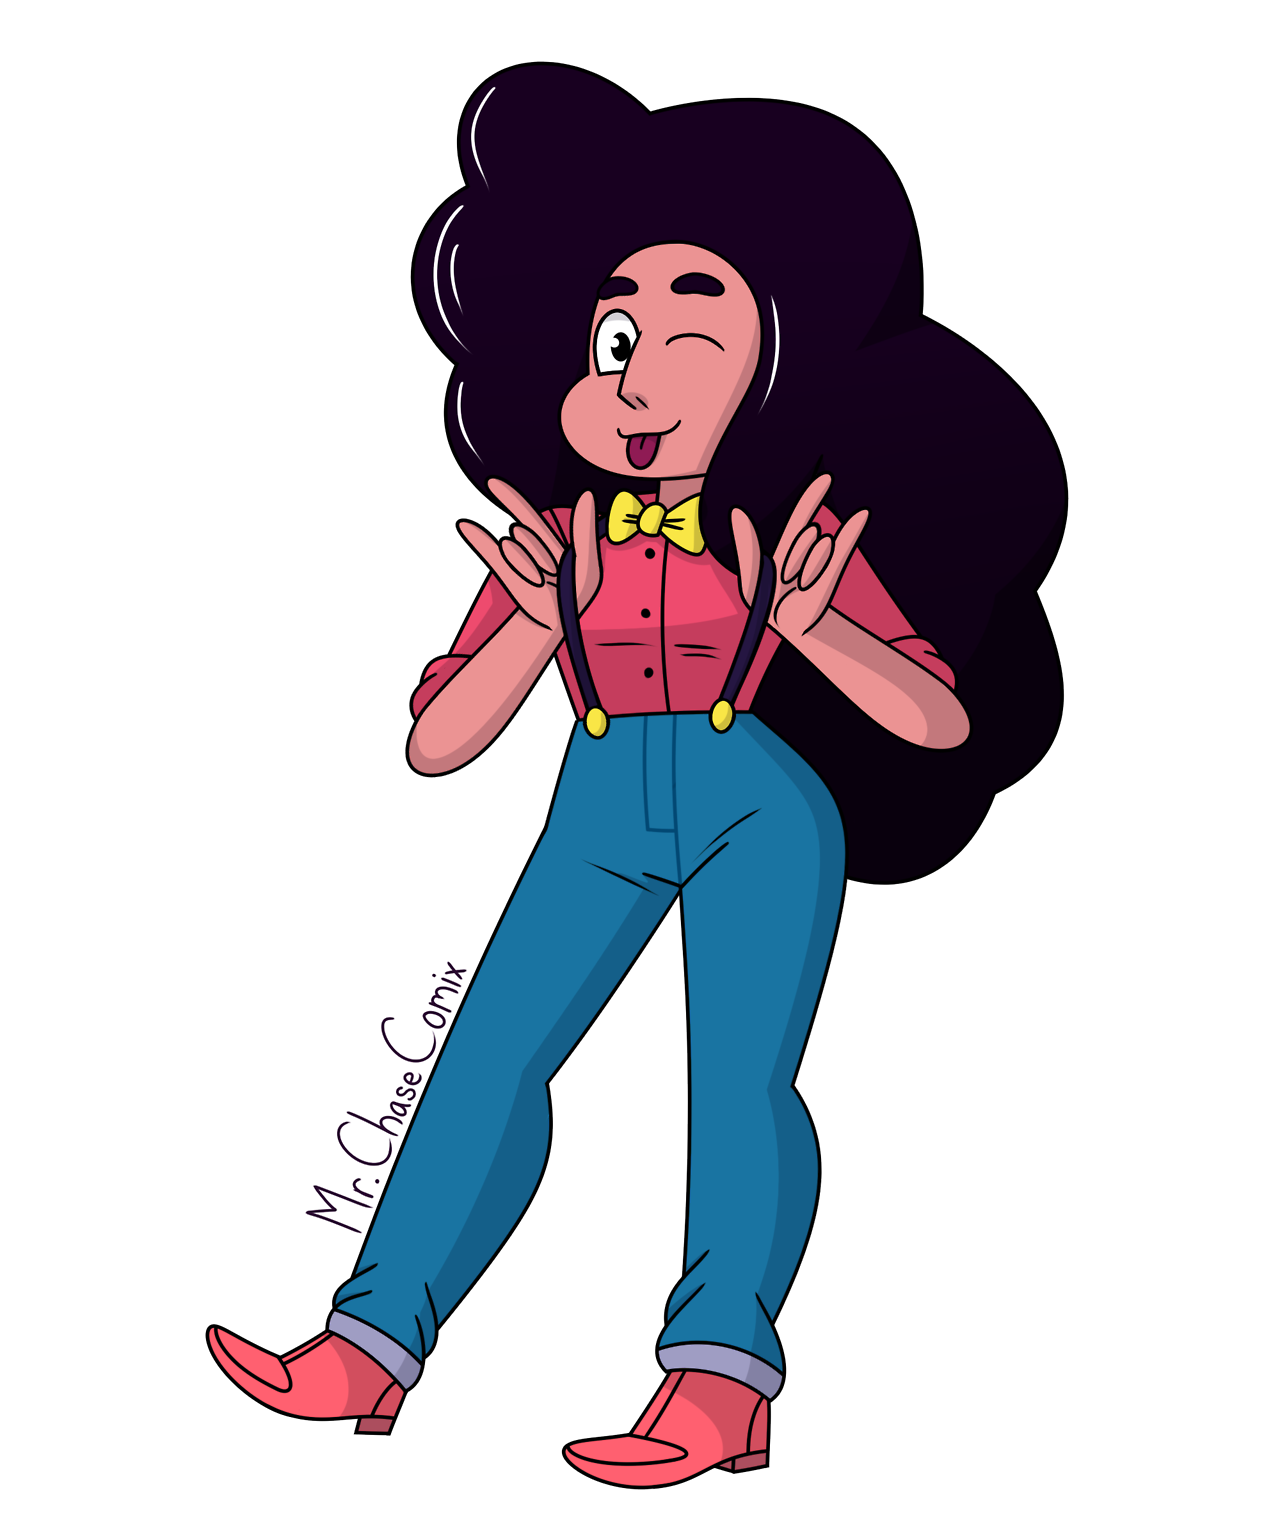 Apologies if this is not my best work, I’m super rusty when it comes to drawing Stevonnie. I also know that an anon wanted me to draw Stevonnie in suspenders, but I lost that in my inbox. Hope this is...